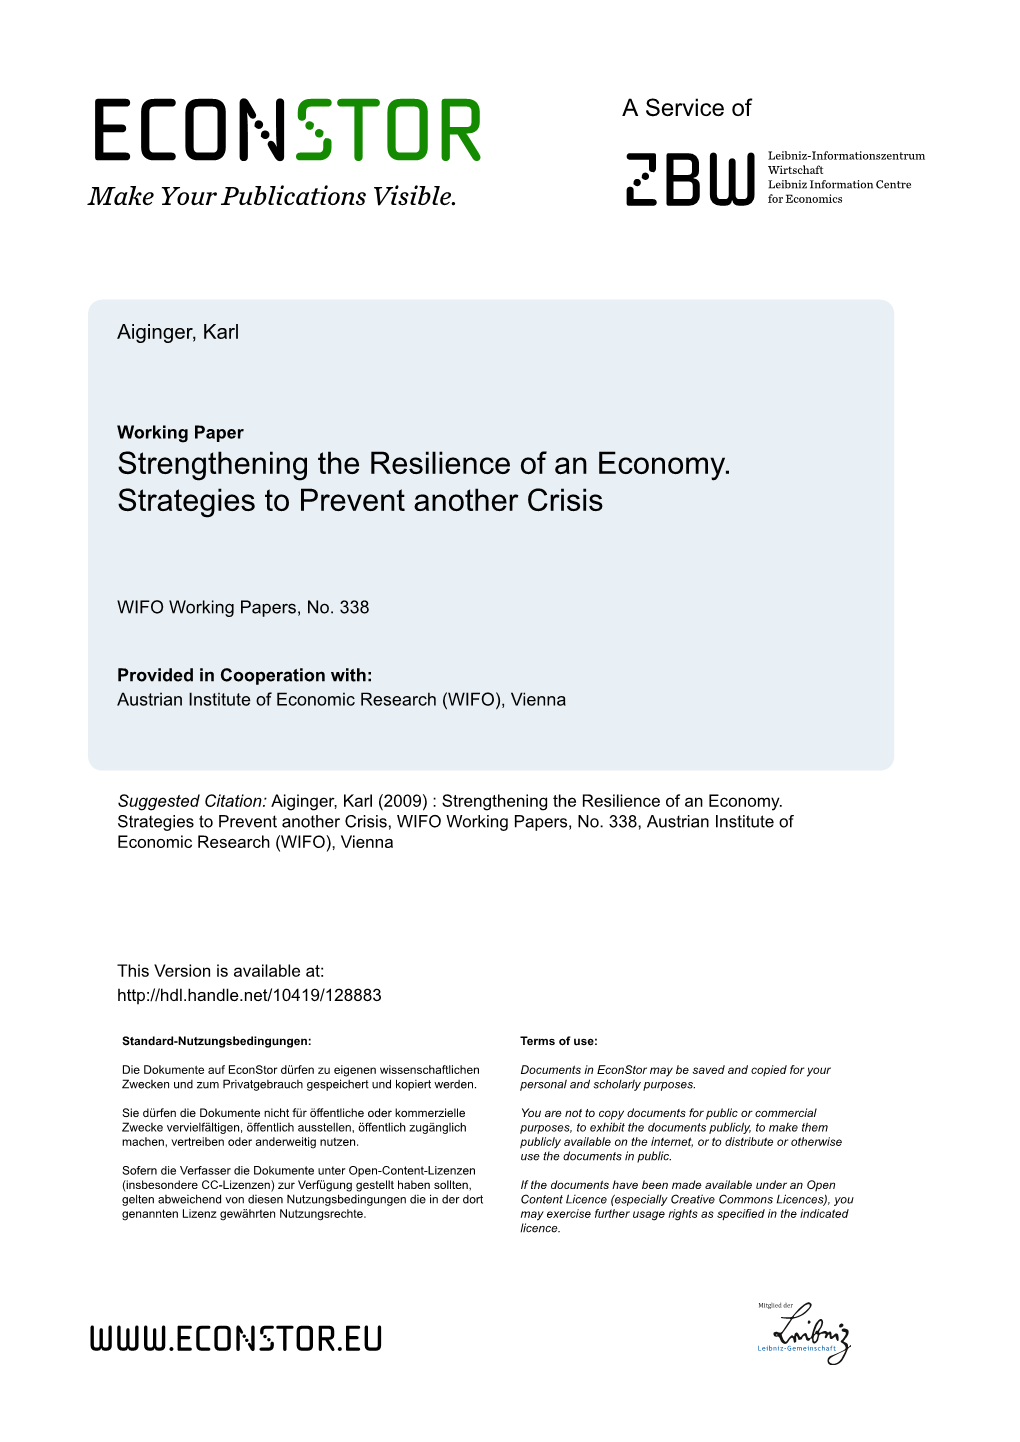 Strengthening the Resilience of an Economy. Strategies to Prevent Another Crisis